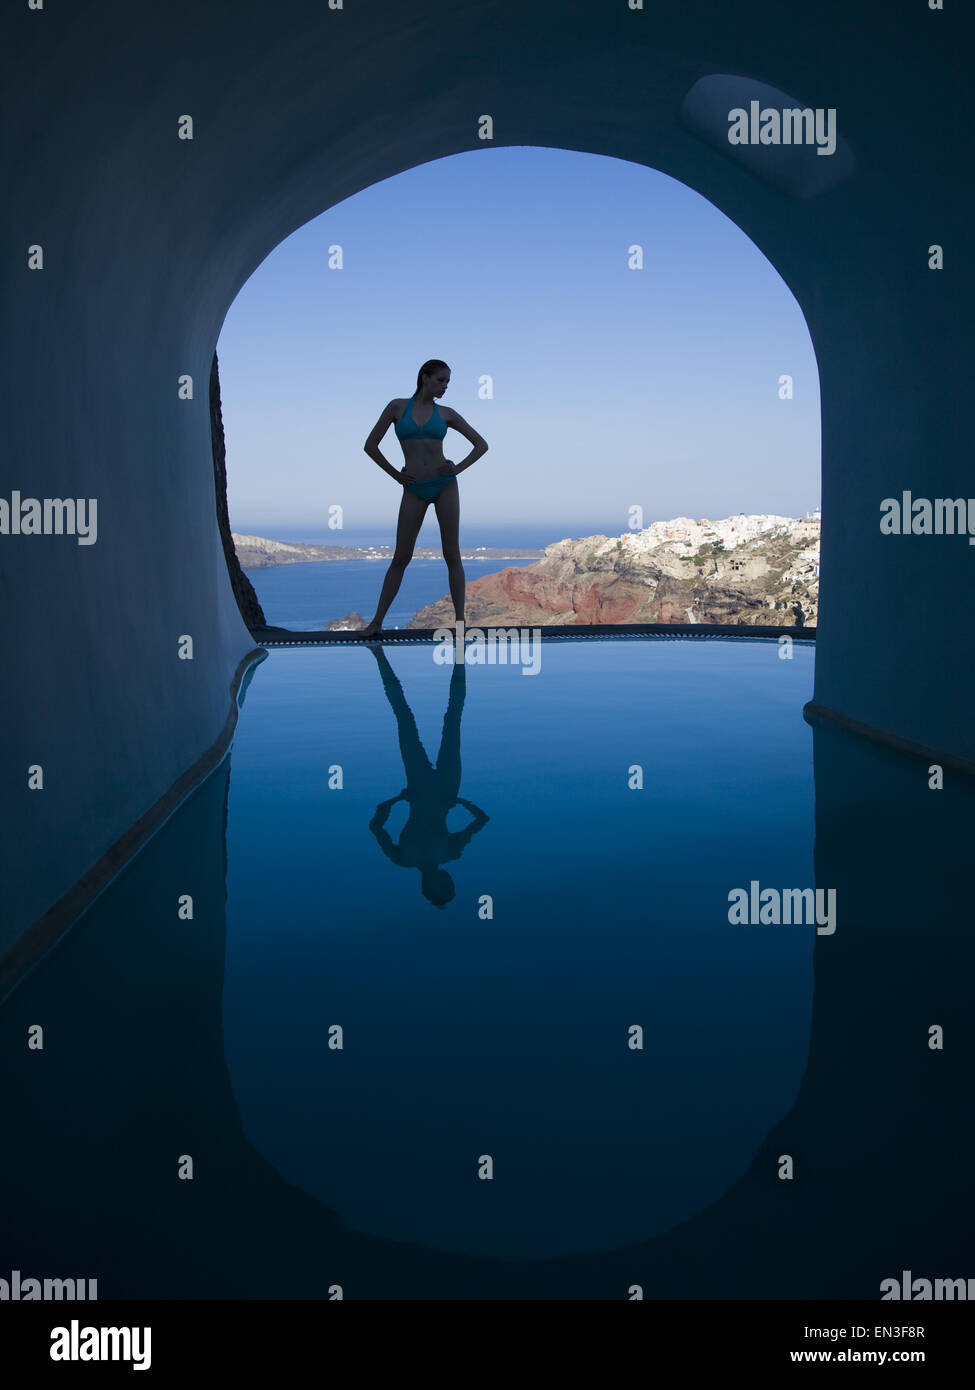 Silhouette of woman in bikini standing at edge of infinity pool with arch and rock formation Stock Photo